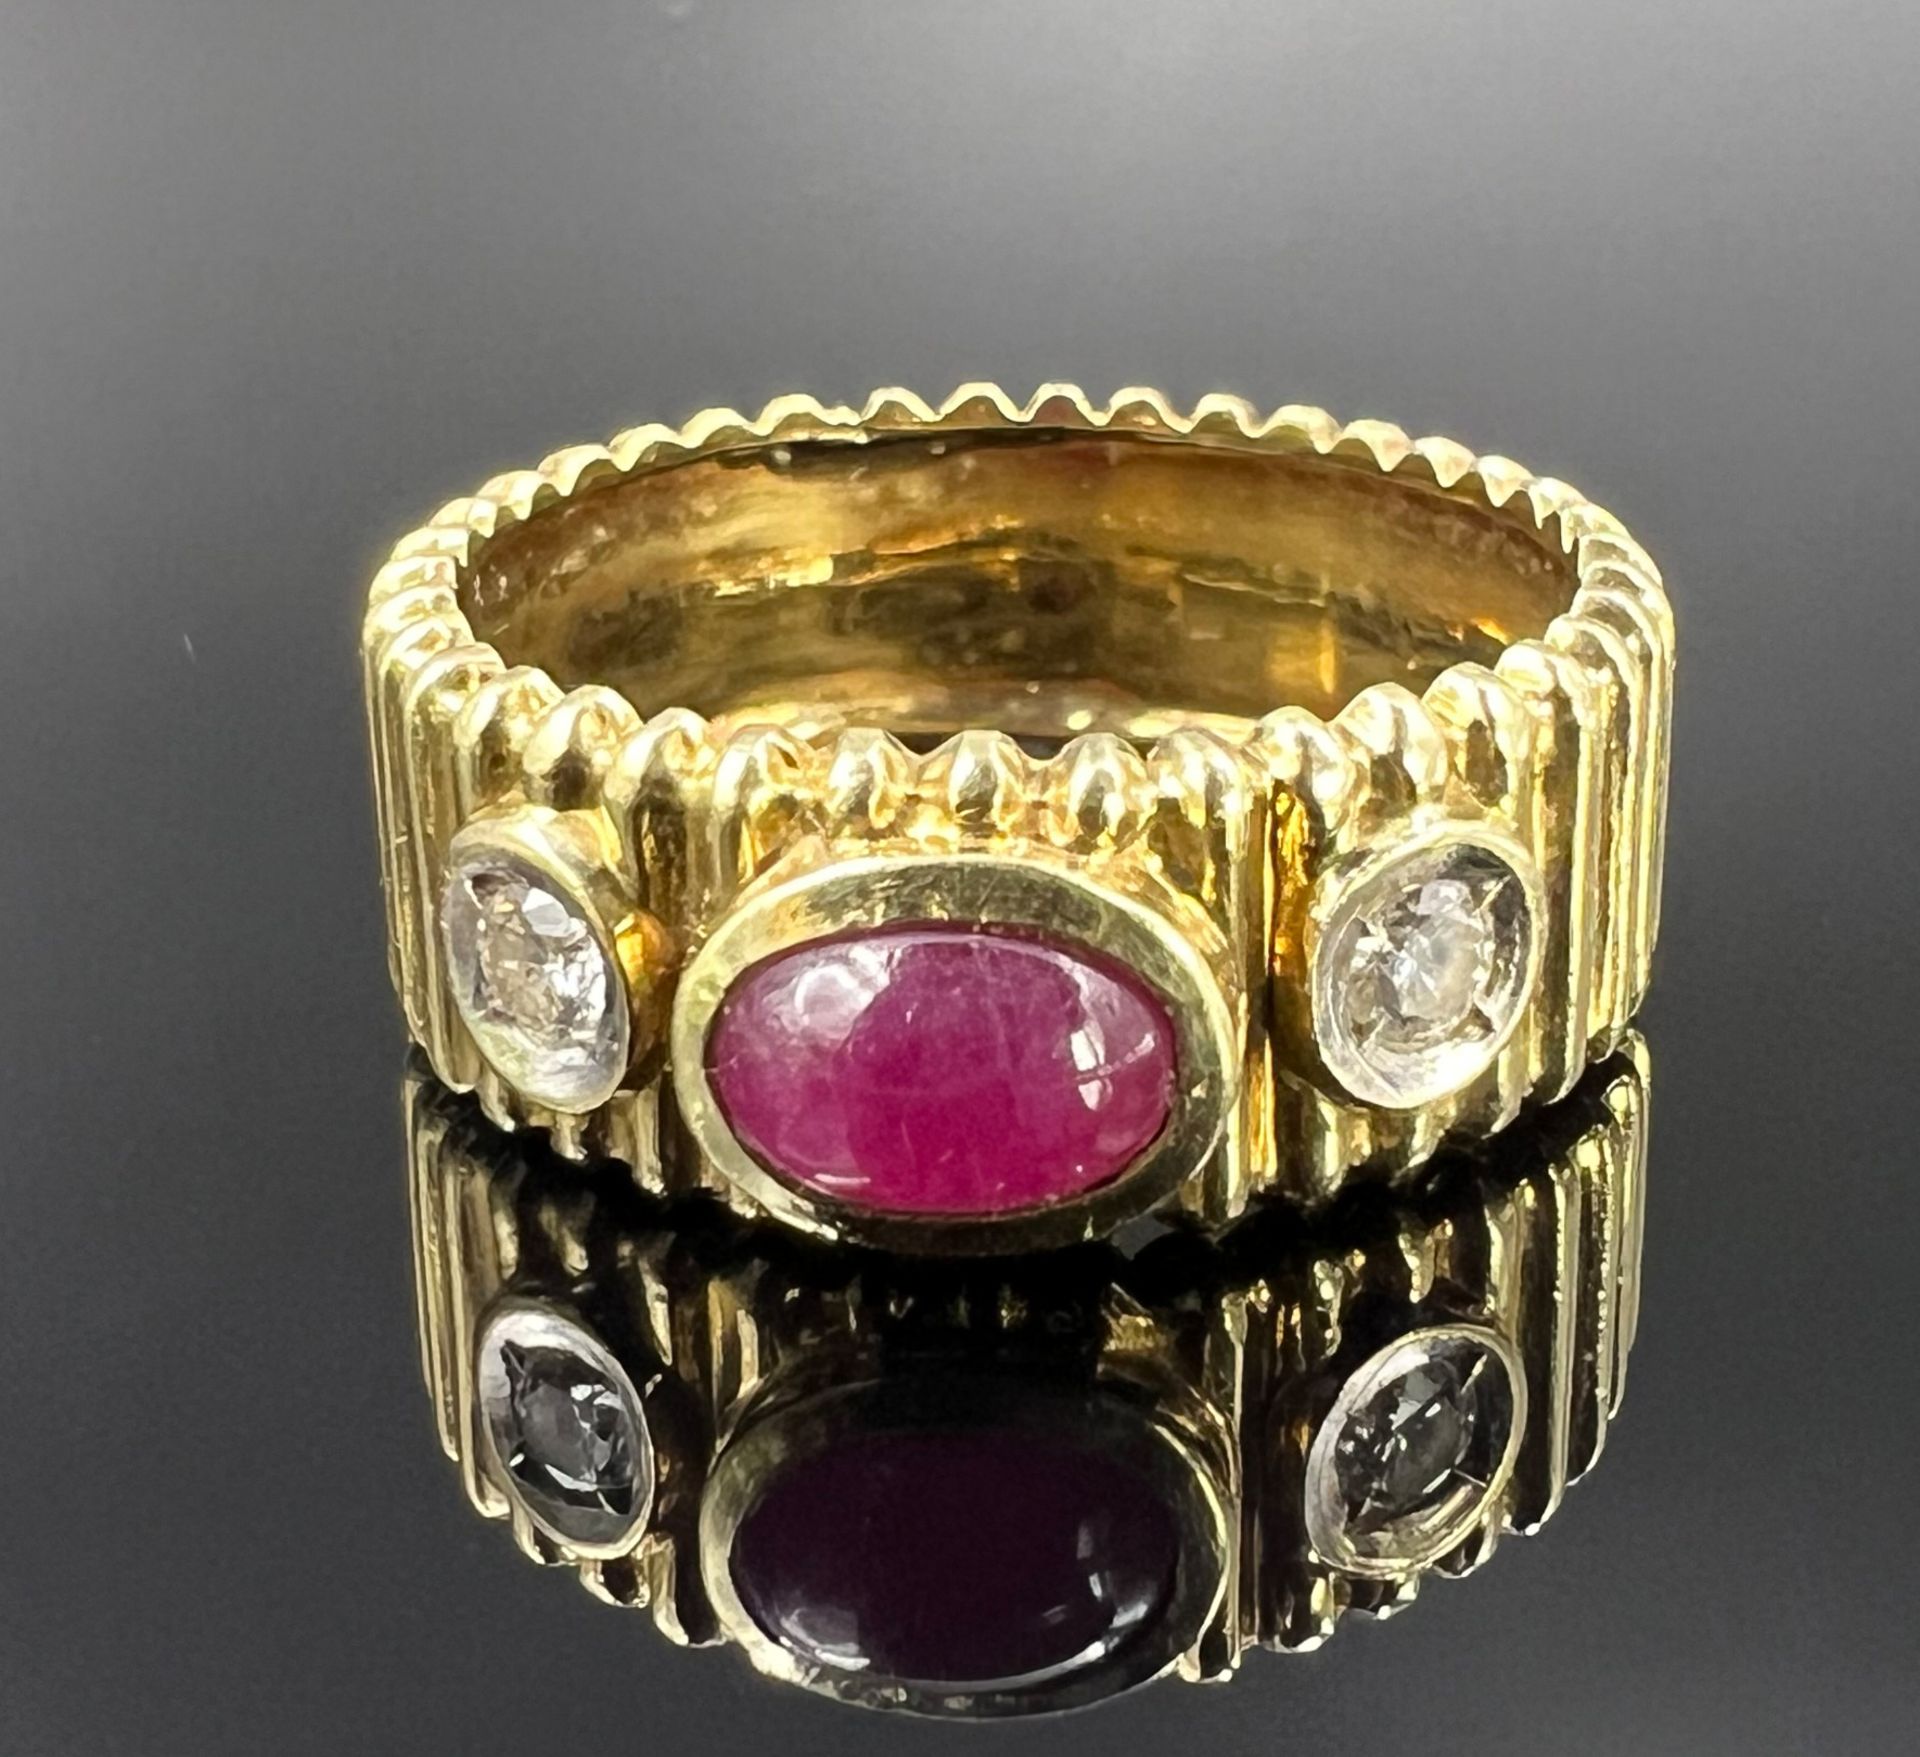 Ladies' ring. 585 yellow gold. 1 coloured stone cabochon and 2 small diamonds.